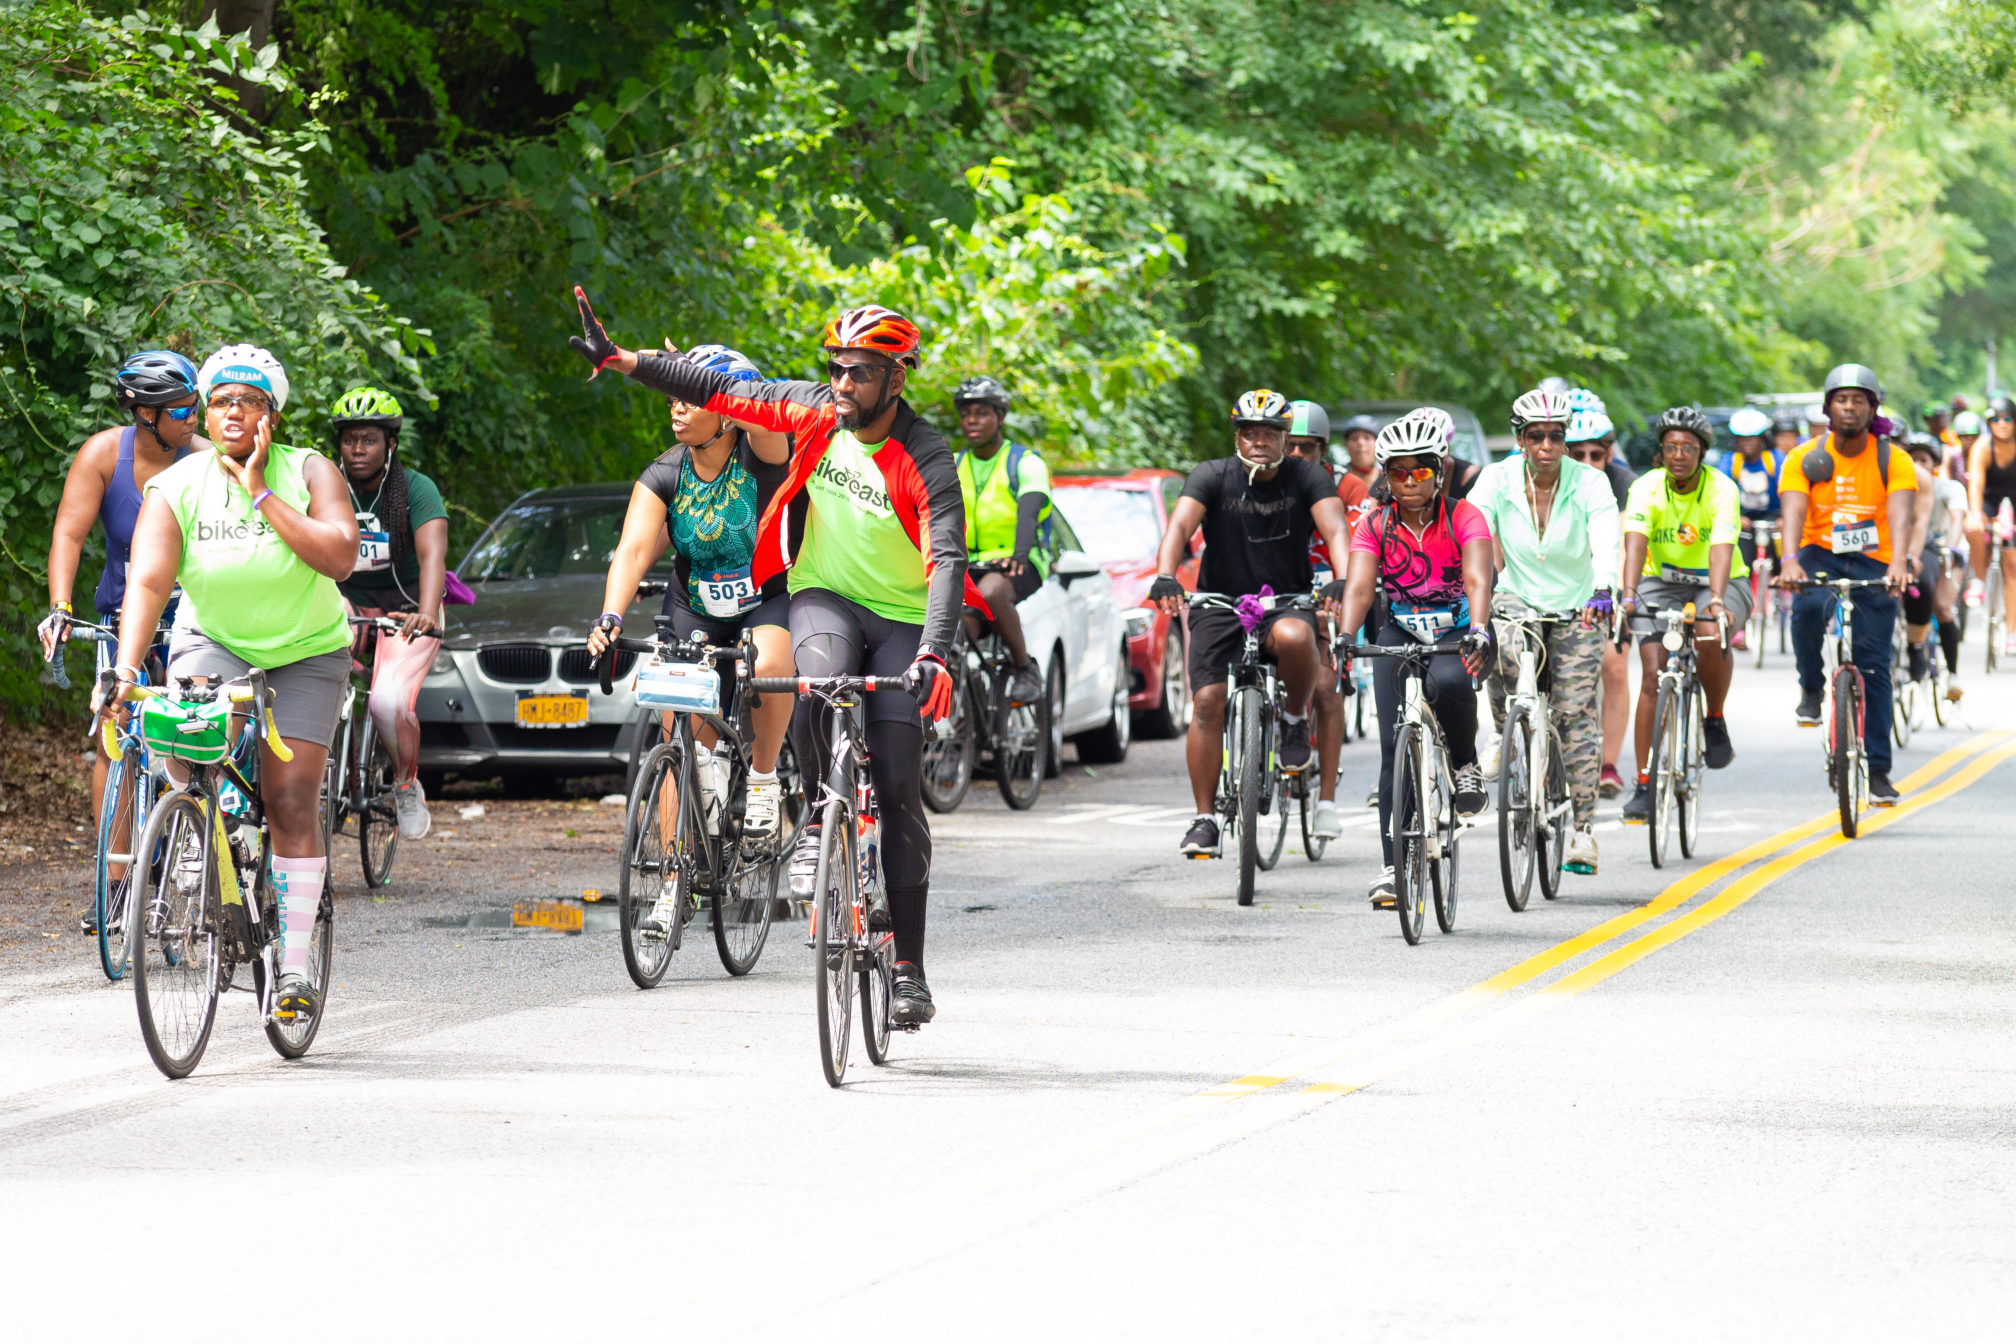 Kevin Joseph (center) leads a group on a bike tour. Photo courtesy of Kevin Joseph